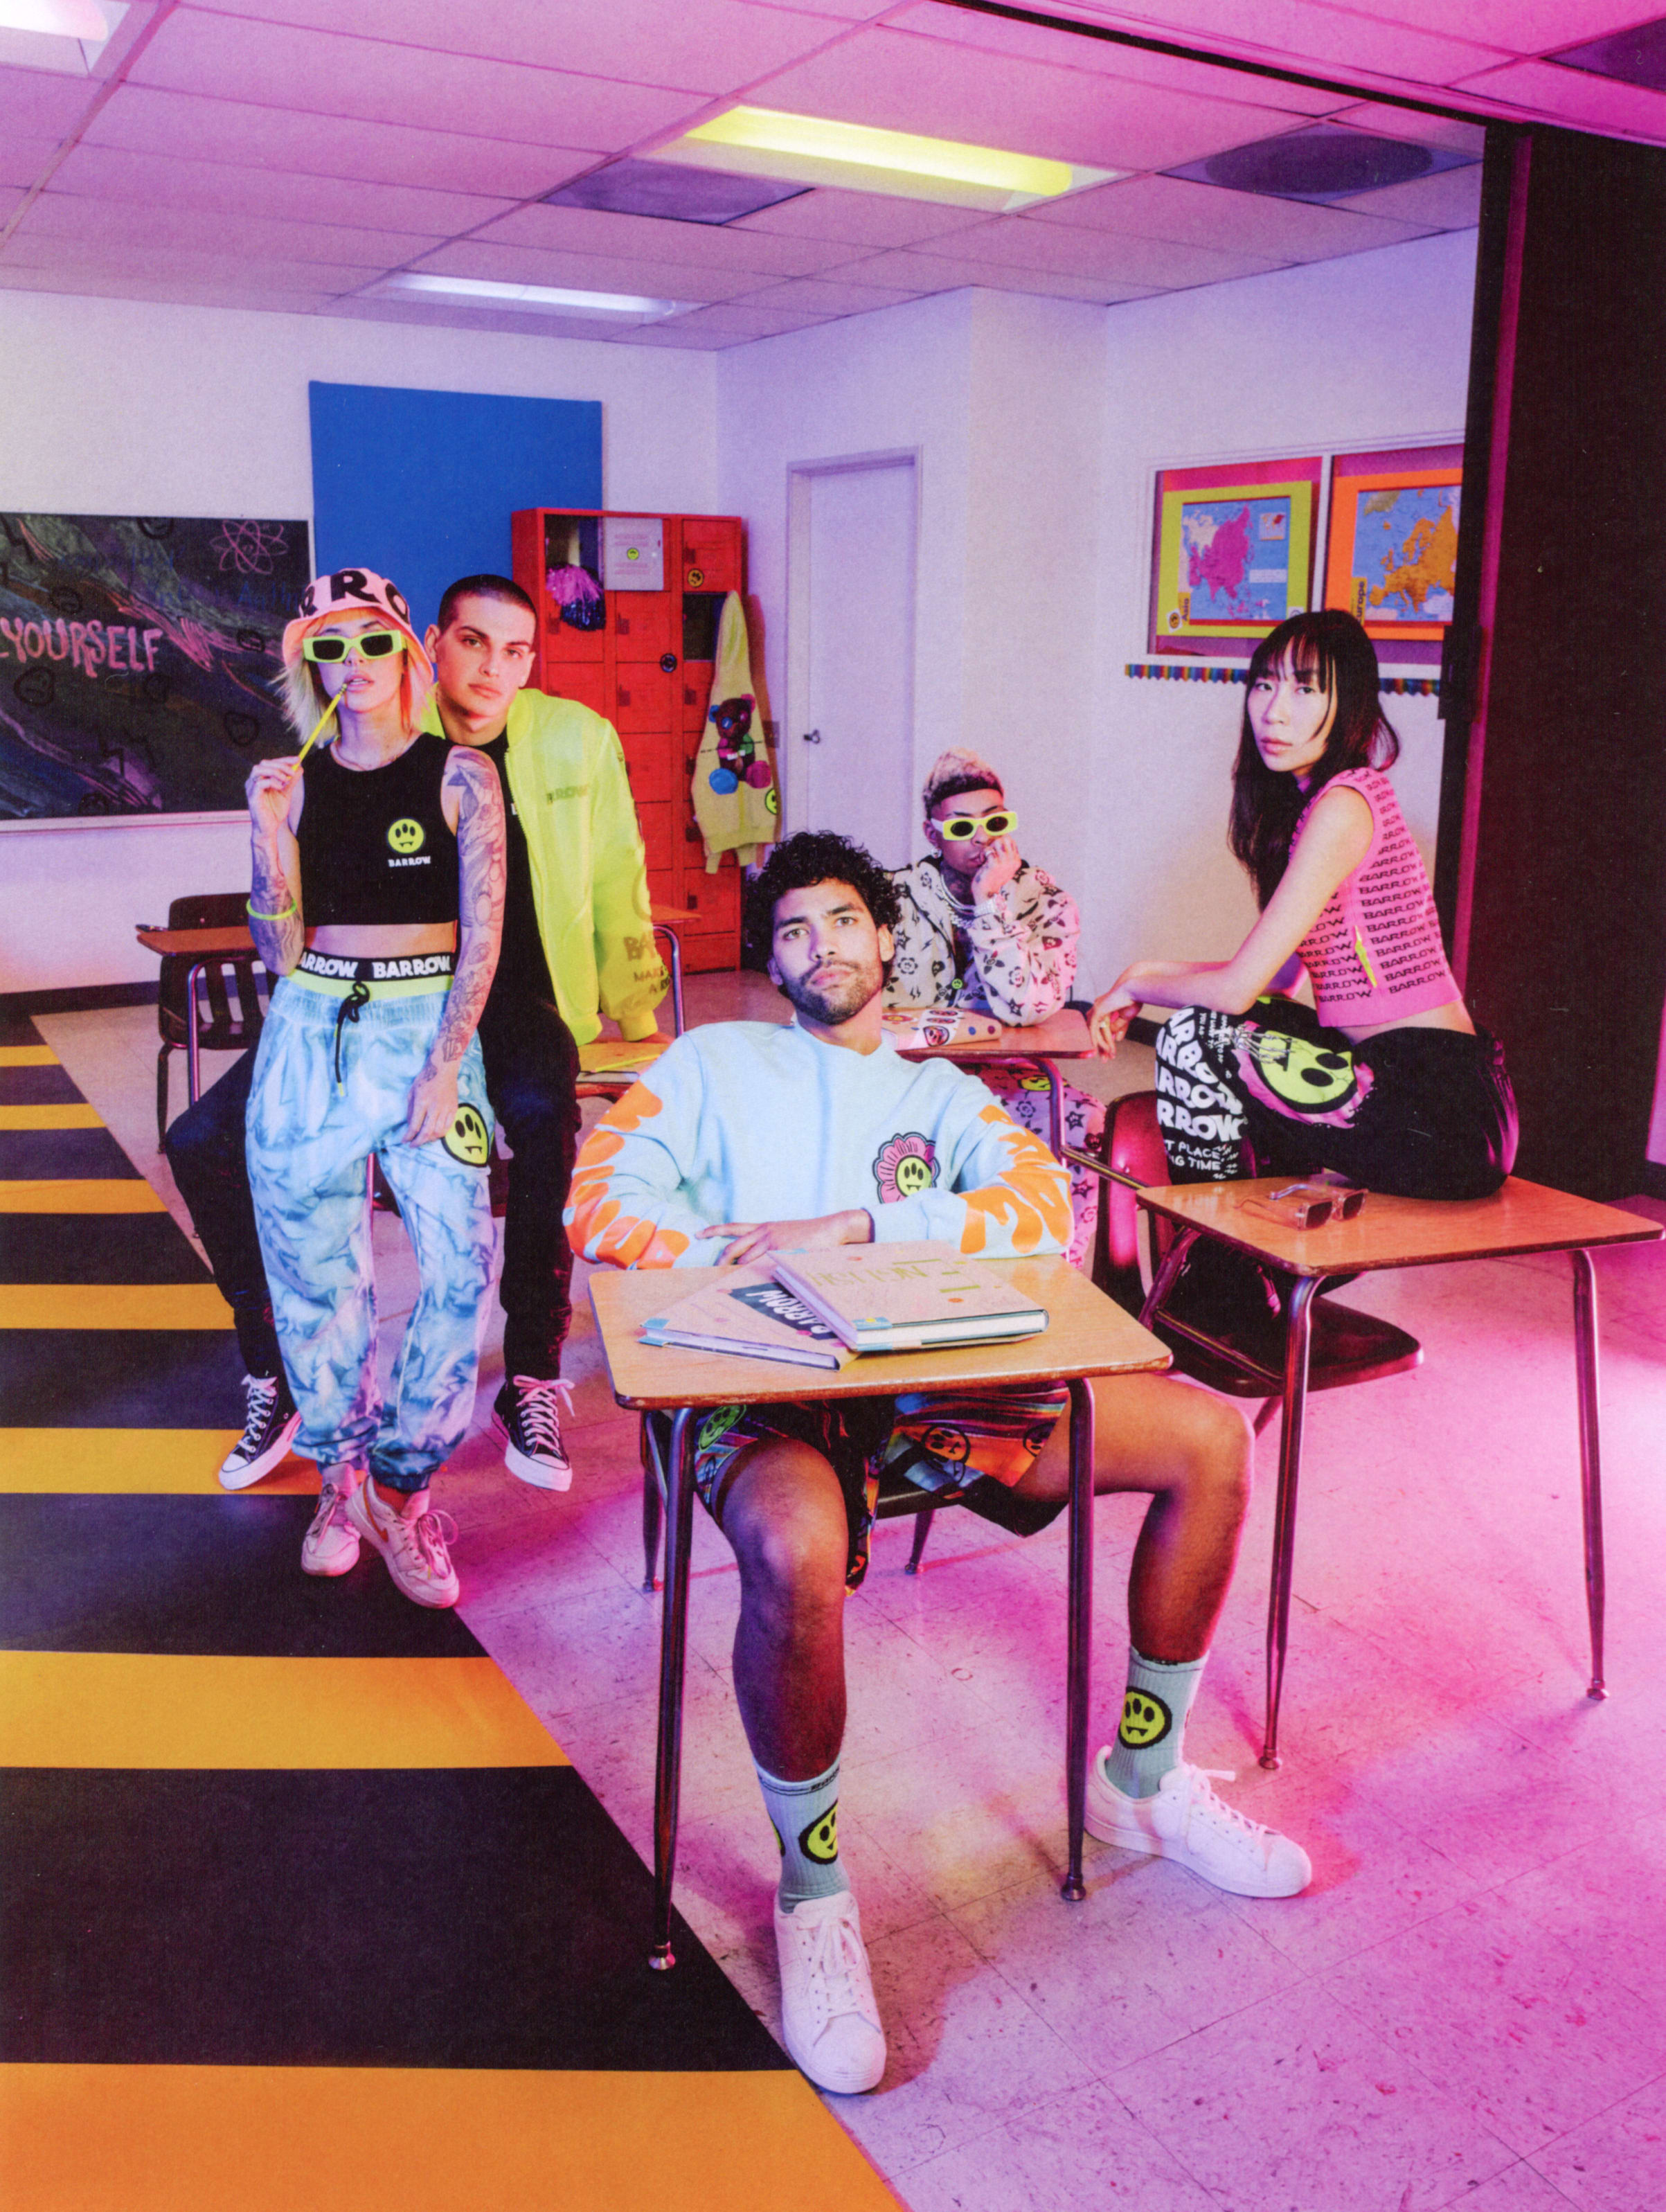 Influencers dressed in neon clothes in a classroom